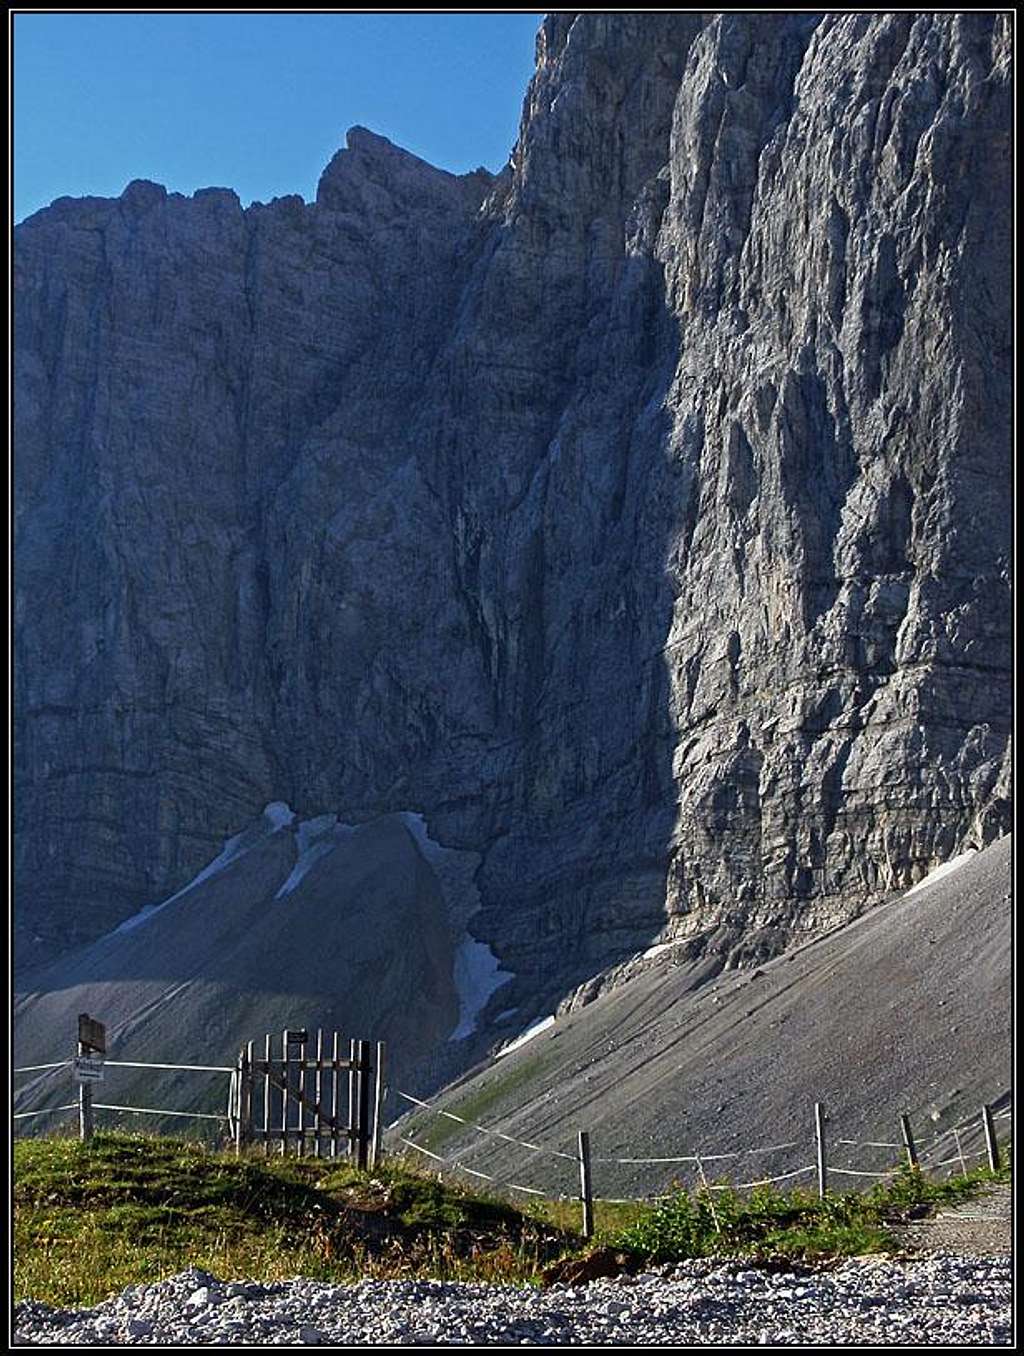 The gate to climbing